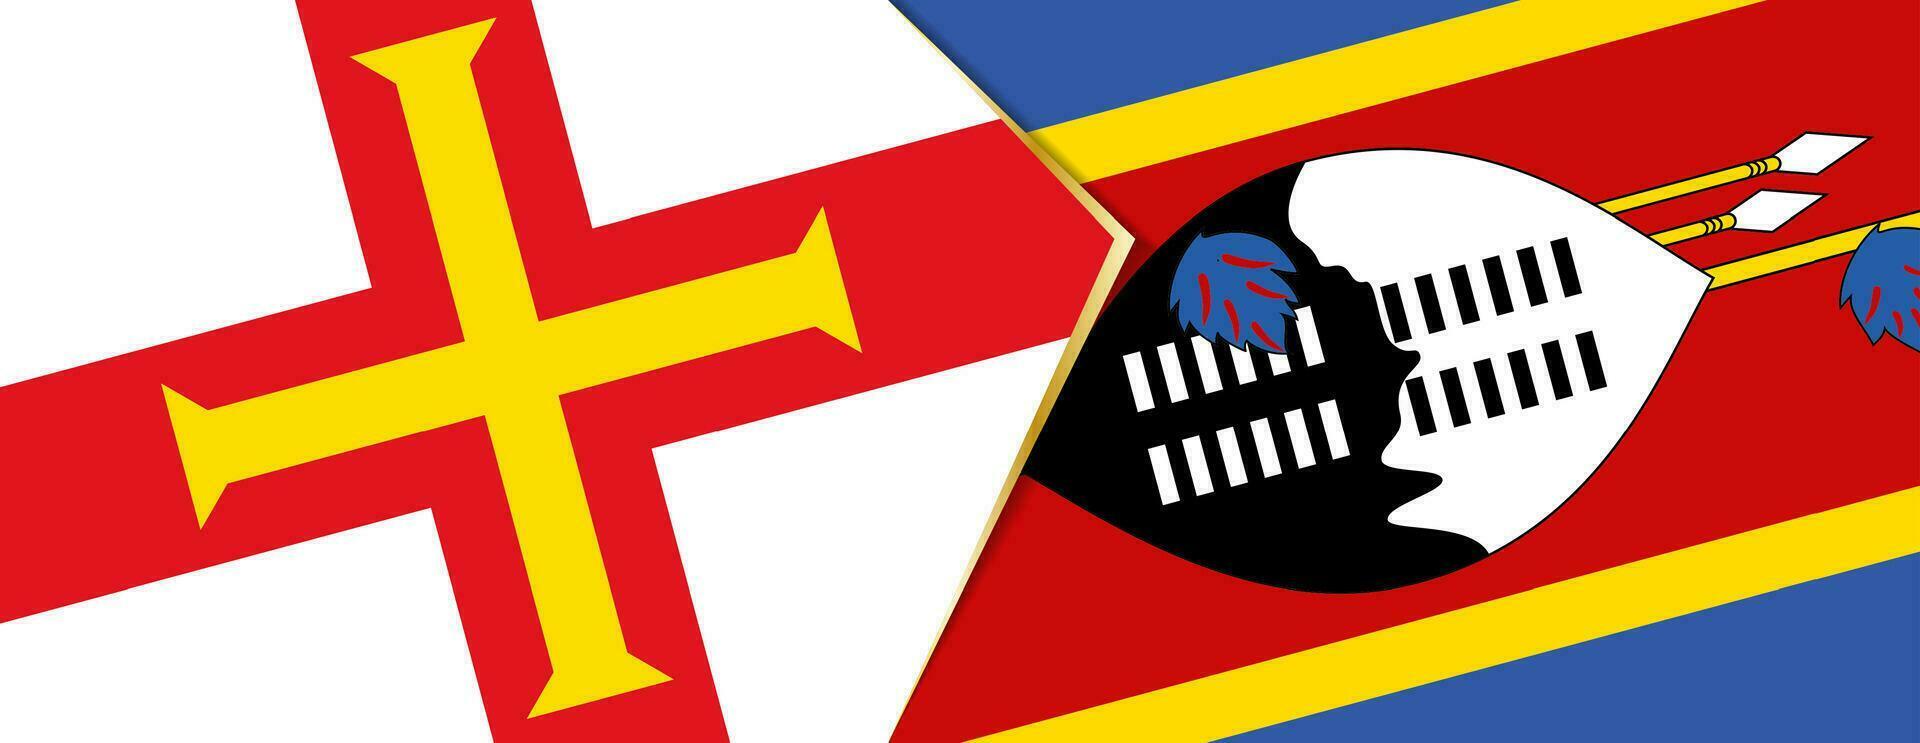 Guernsey and Swaziland flags, two vector flags.